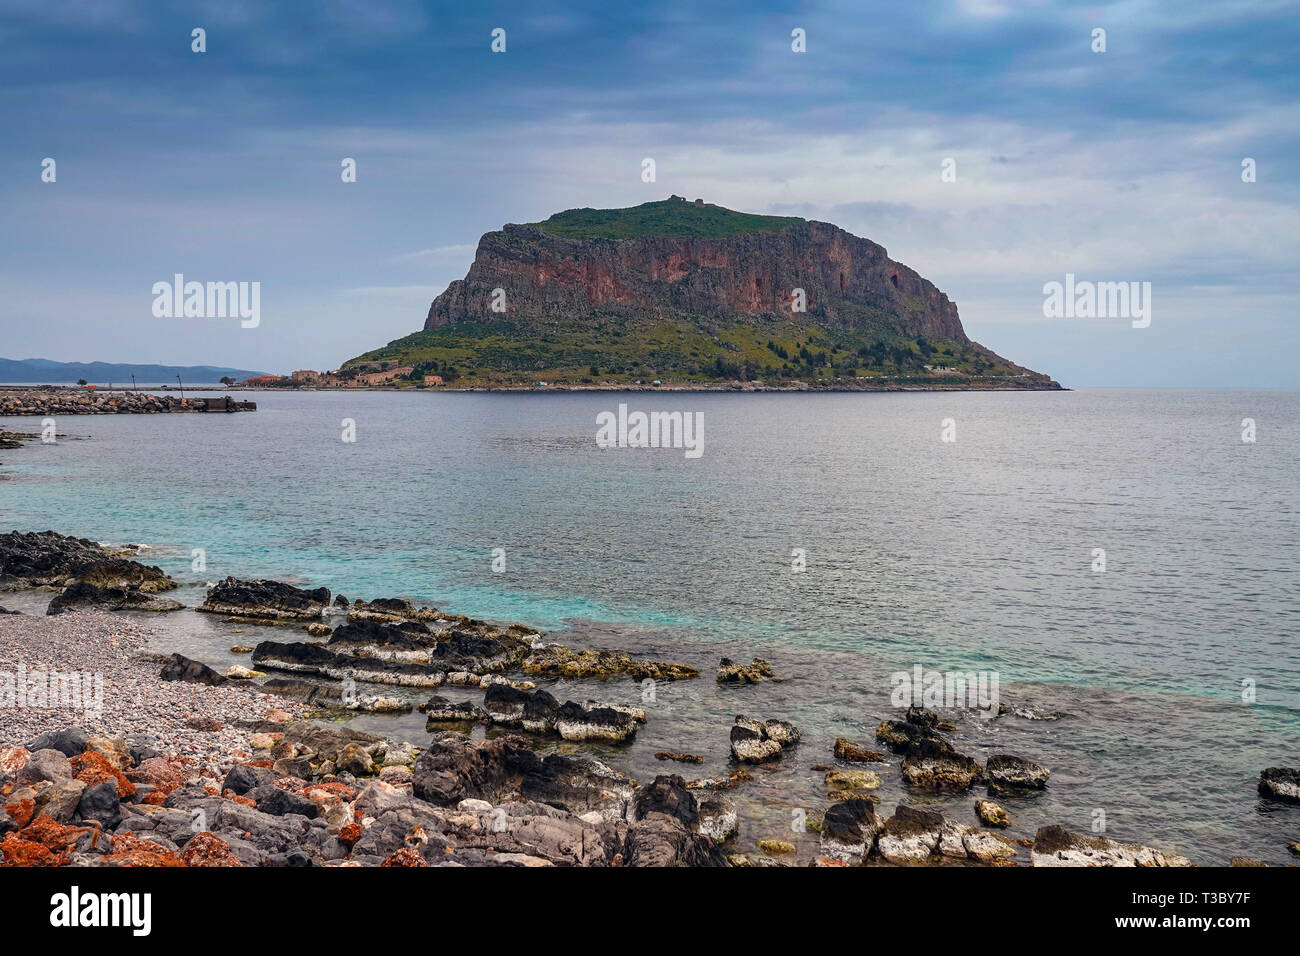 The ancient fortified island of Monemvasia, Peleponnese, Greece, Greek Stock Photo